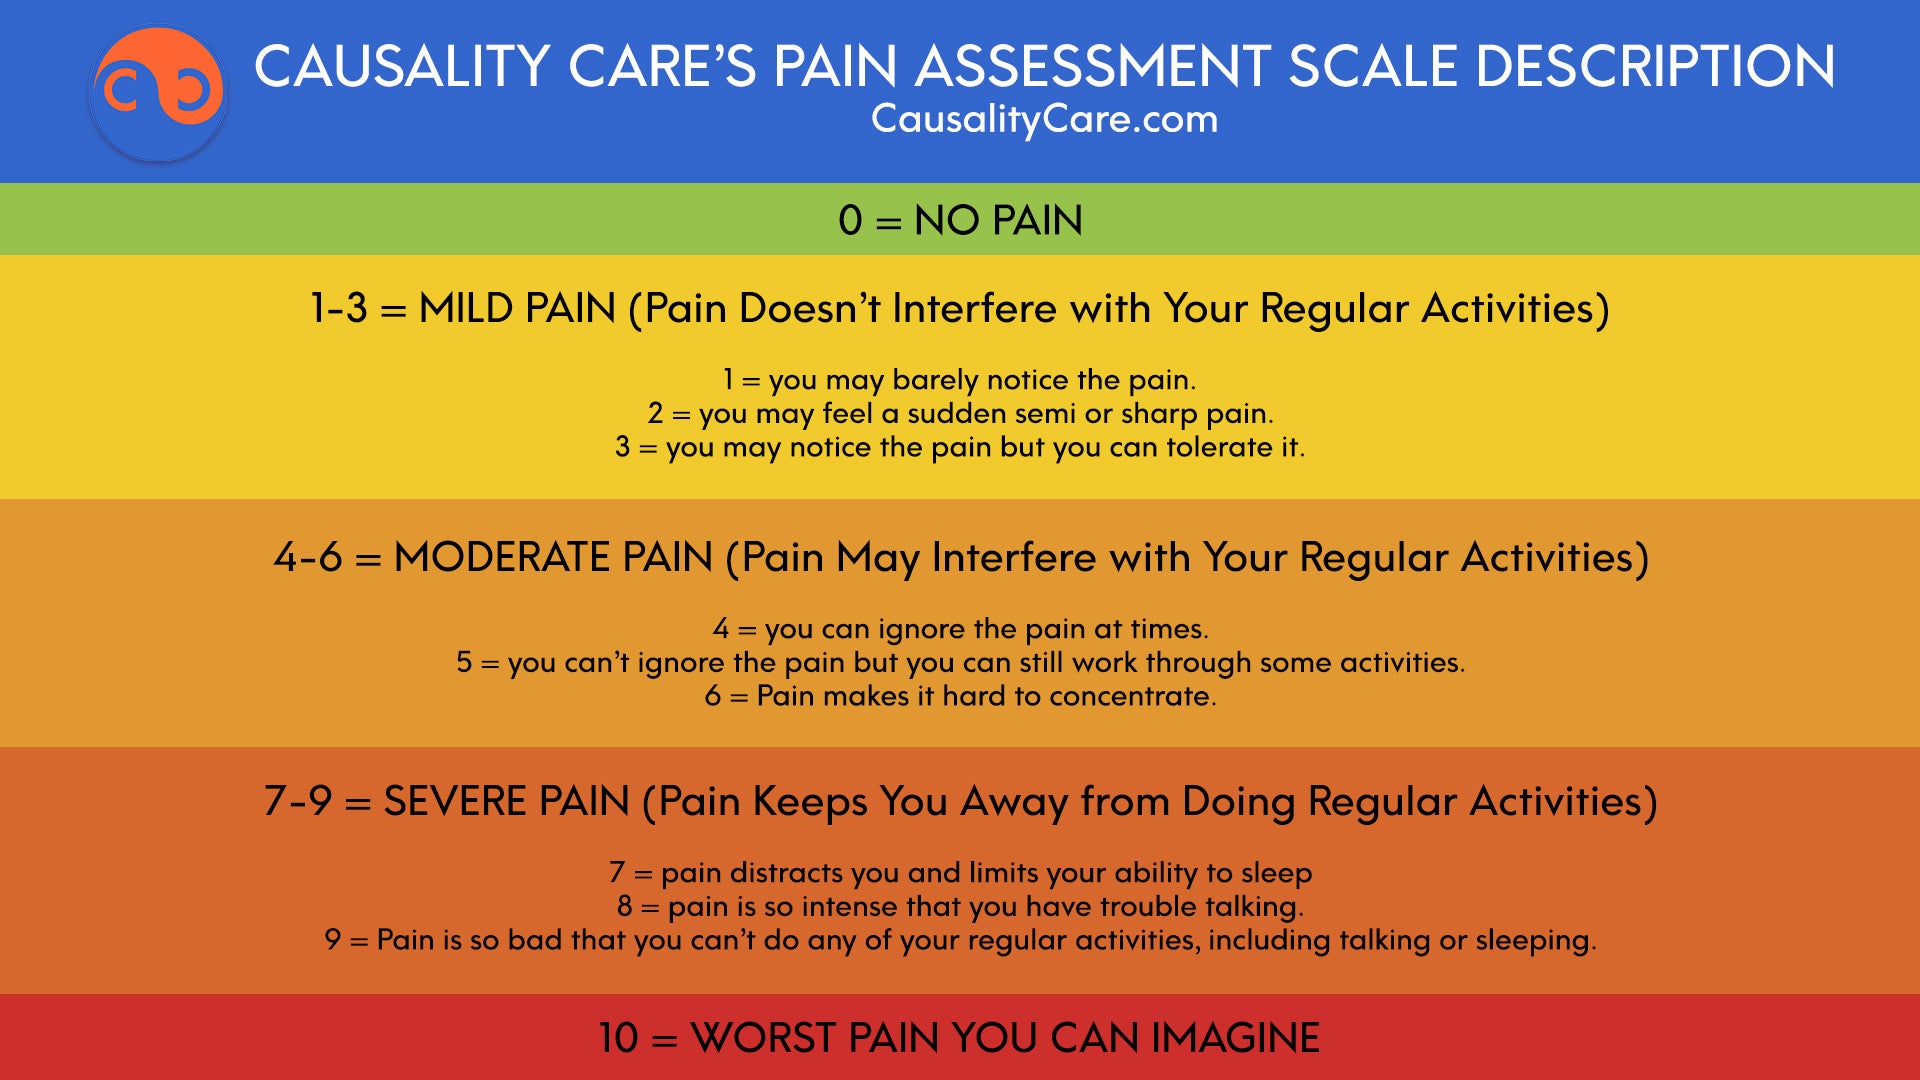 How to Recognize and Assess Pain